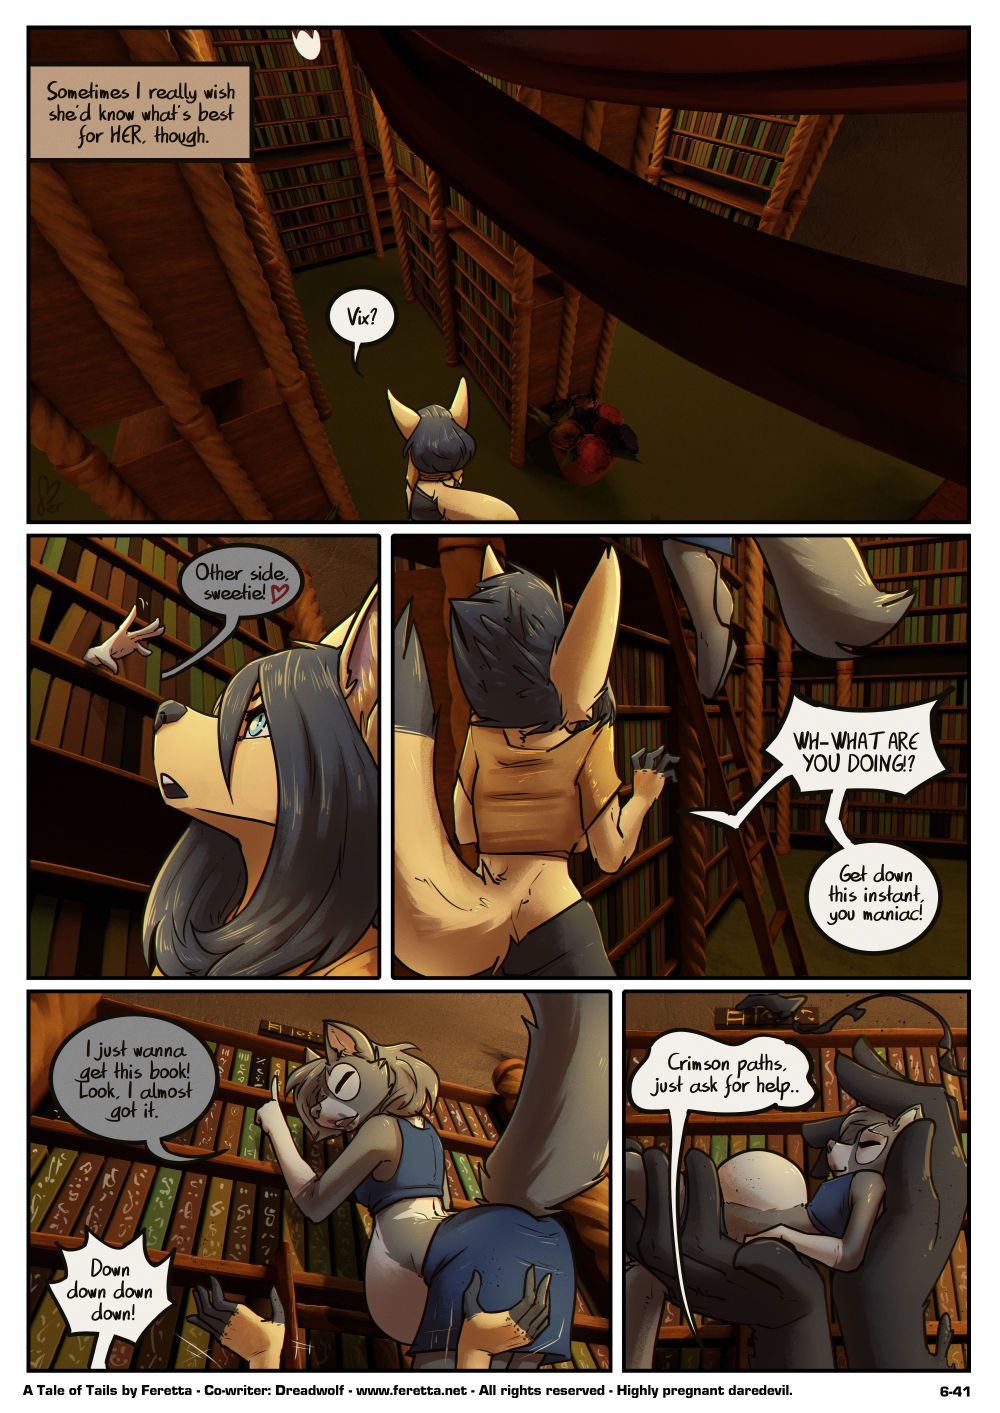 [Feretta] A Tale of Tails: Chapter 6 - Paths converge (ongoing) 43